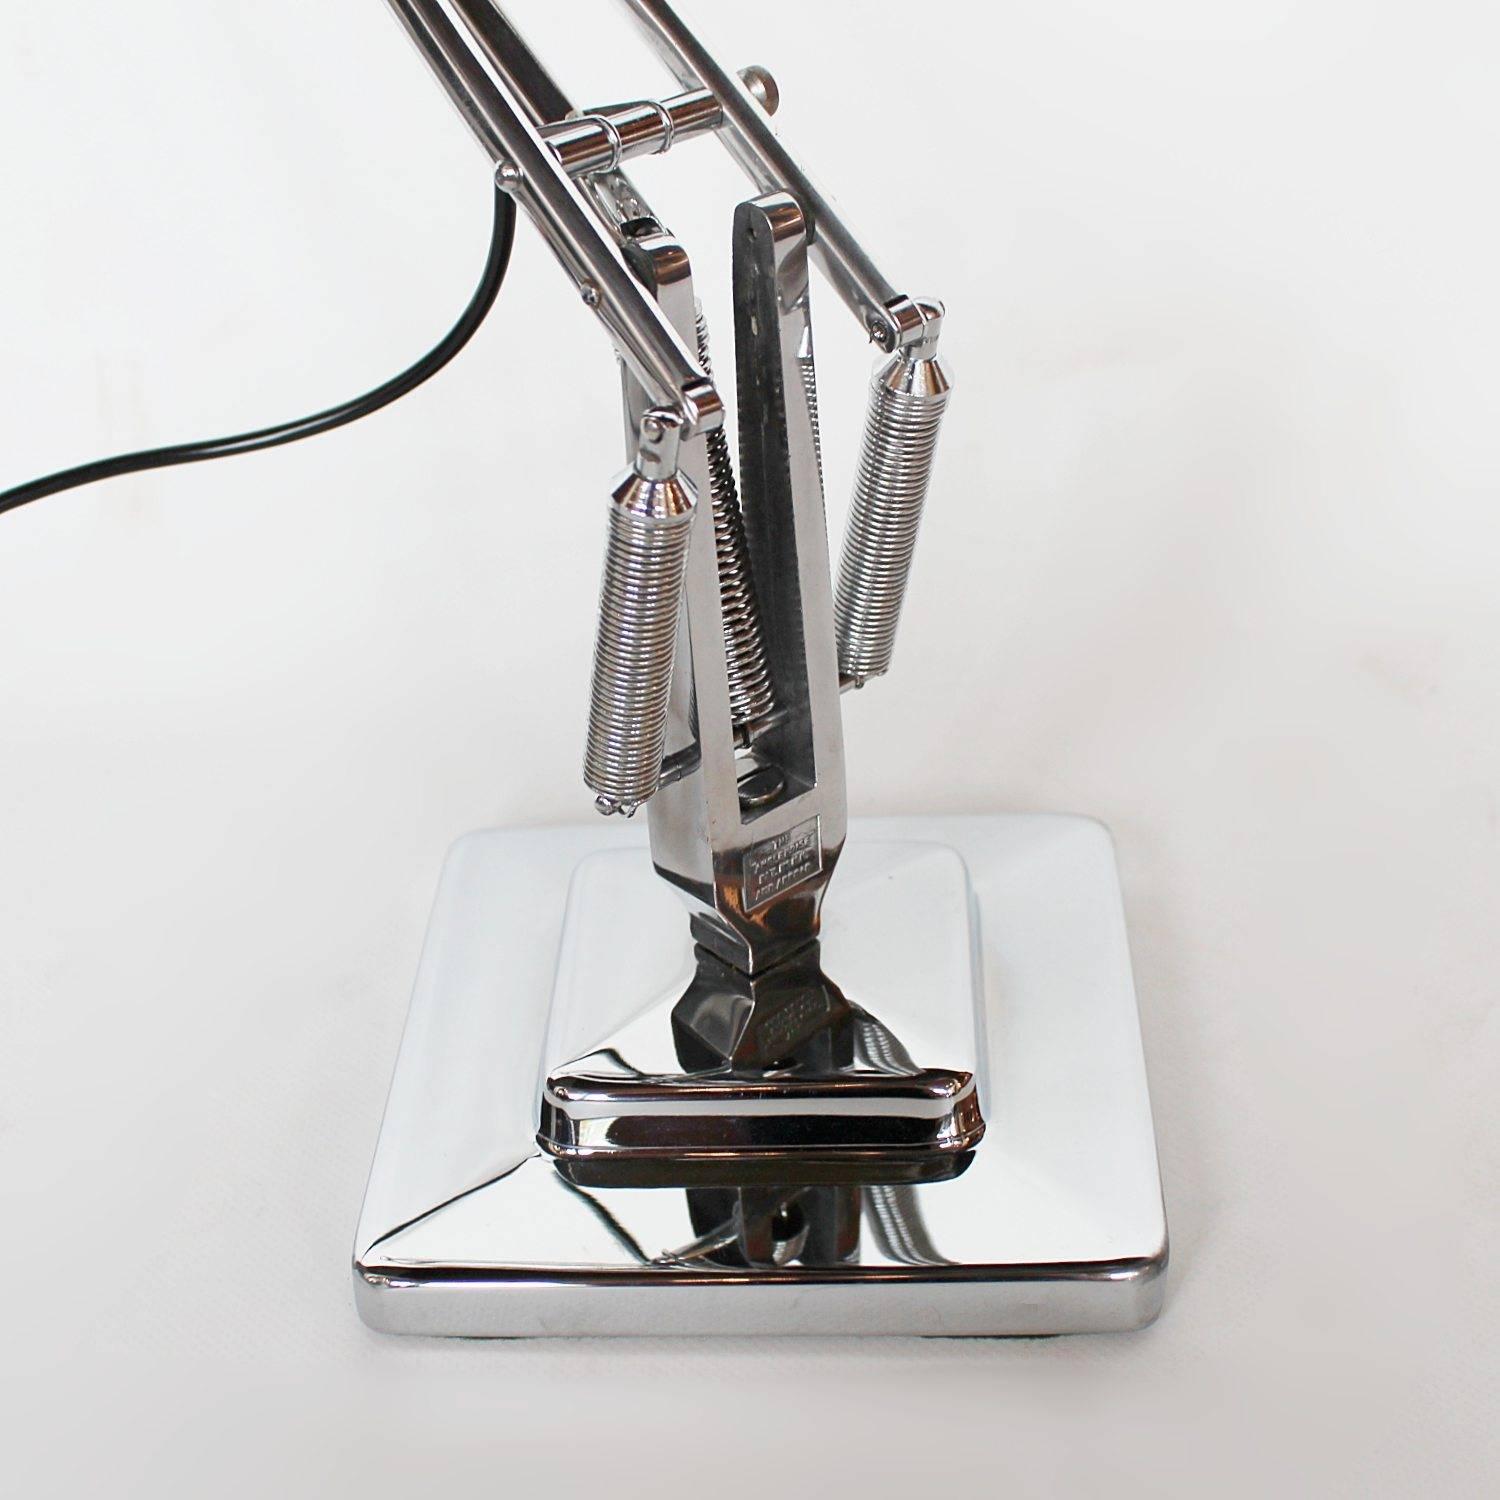 An Art Deco, chromed metal anglepoise desk lamp by Herbert Terry & Sons. With a two-step base. Original stamps to stem.

Fully refurbished, re-wired, stripped and re-chromed. Some replacement parts

Dimensions: Base W 15cm, D 15cm, L arm